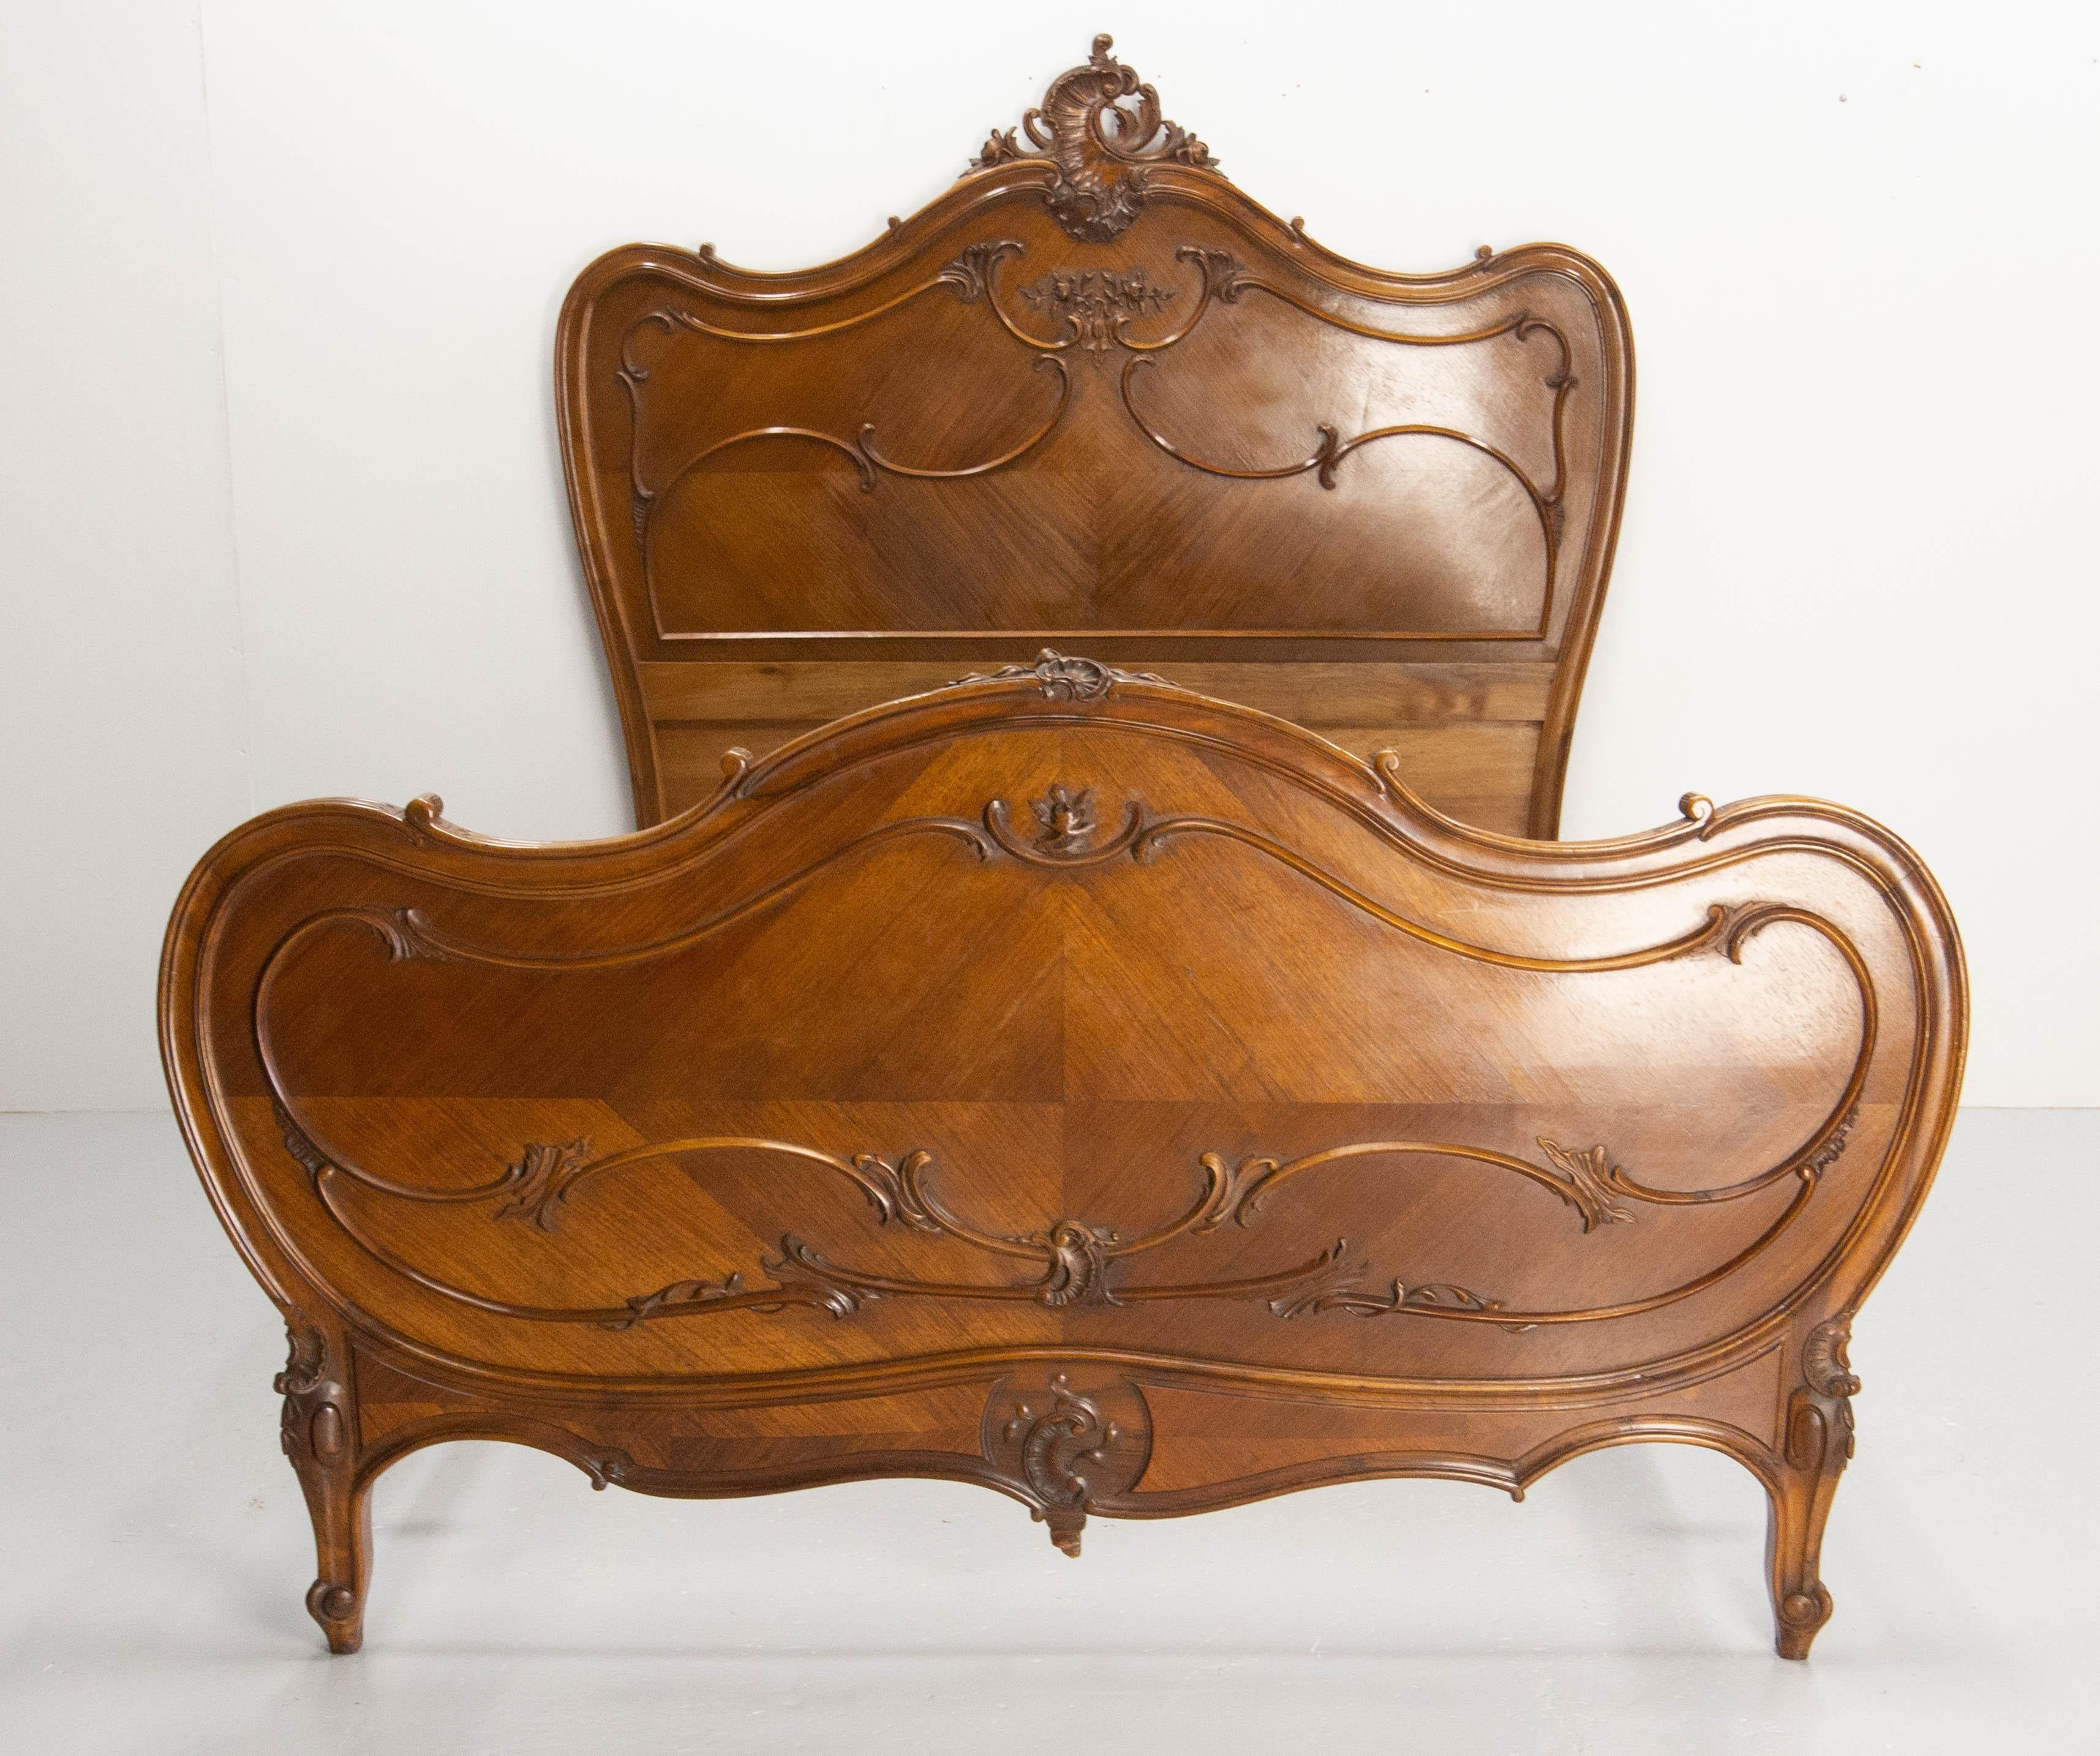 Antique French carved walnut bed US Full 
Made circa 1900 in the Louis XV style
The bedding must be custom made with a box spring of 52.76 in. x 76.38 in. (134 x 194 cm)
Very good antique condition with only very minor marks of use.

Shipping:
Pack